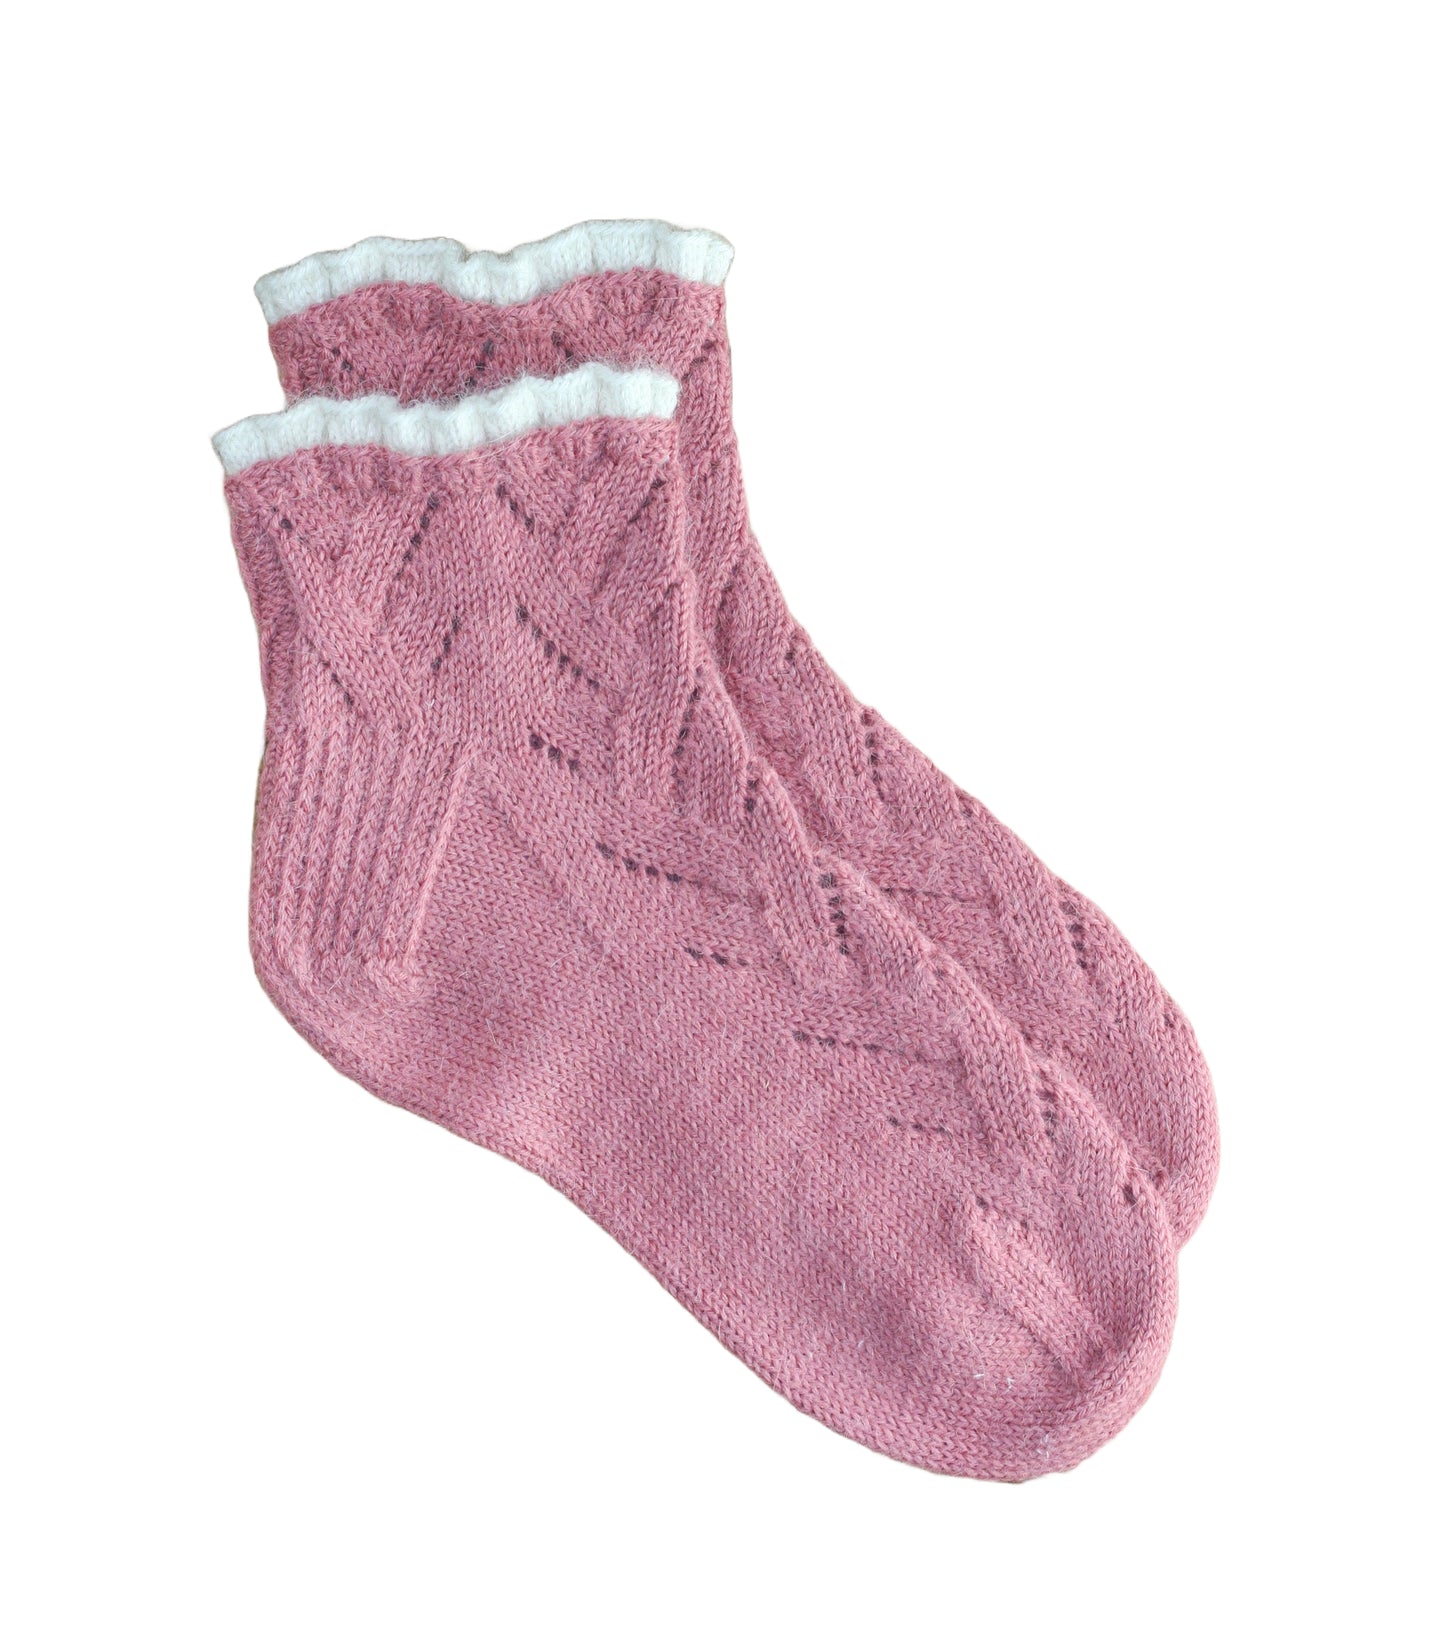 blush pink cable knit luxury socks